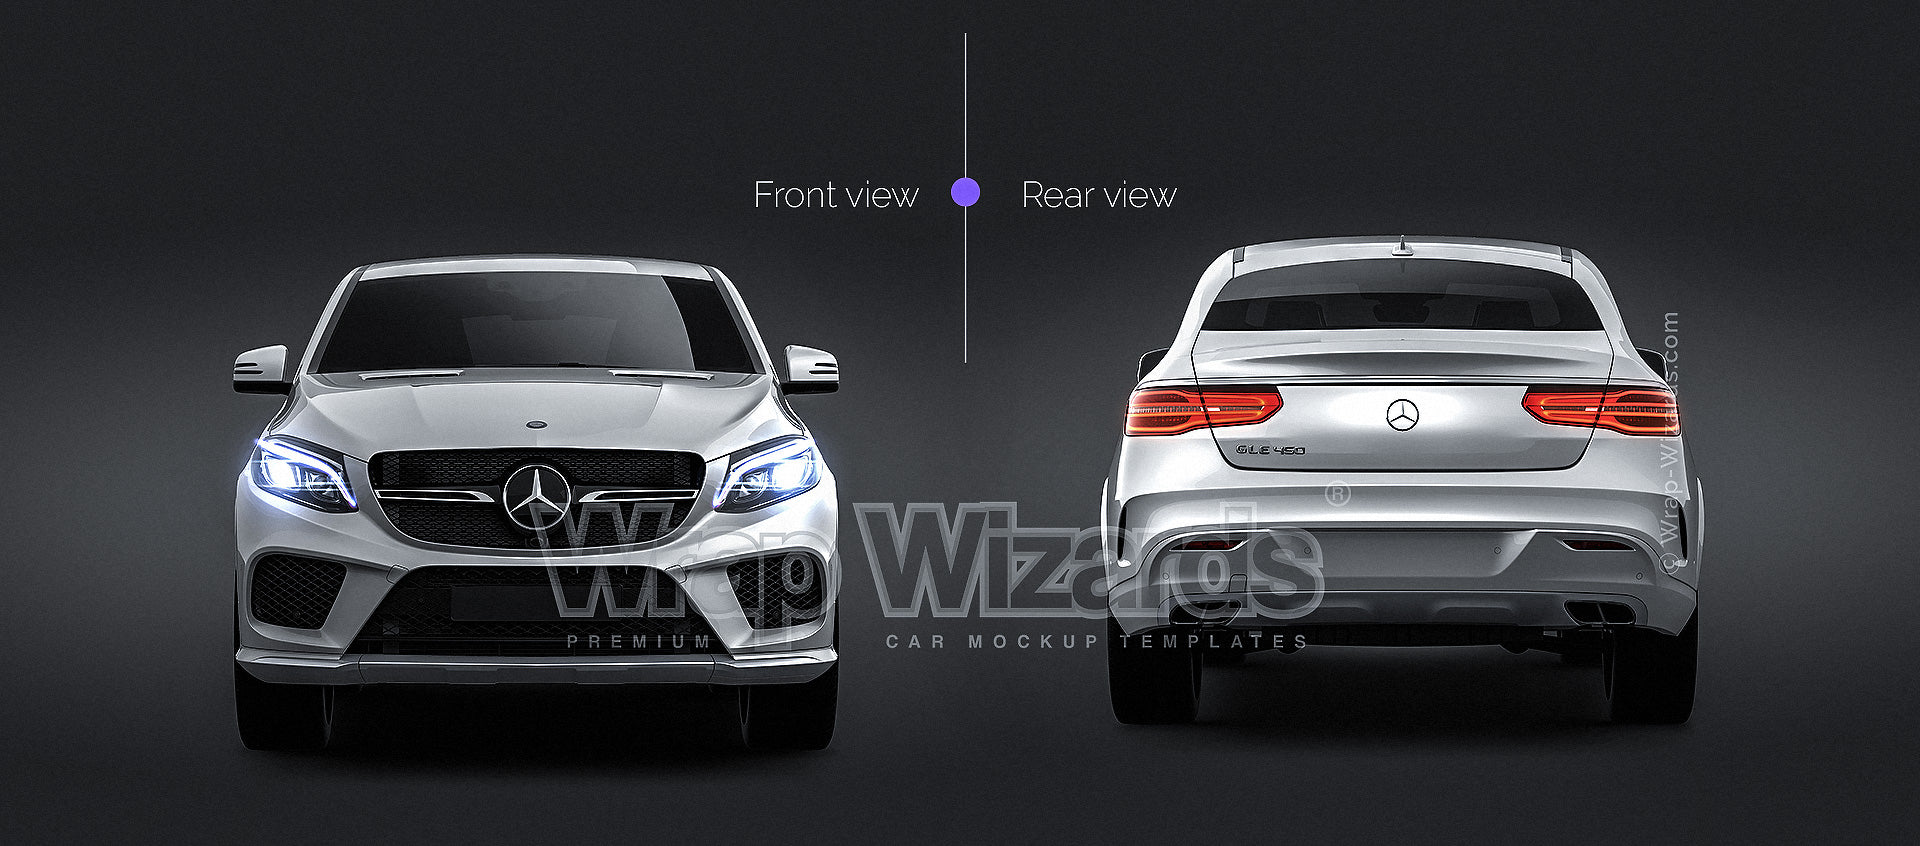 Mercedes-Benz G-class GLE AMG Coupe 2018 glossy finish - all sides Car Mockup Template.psd